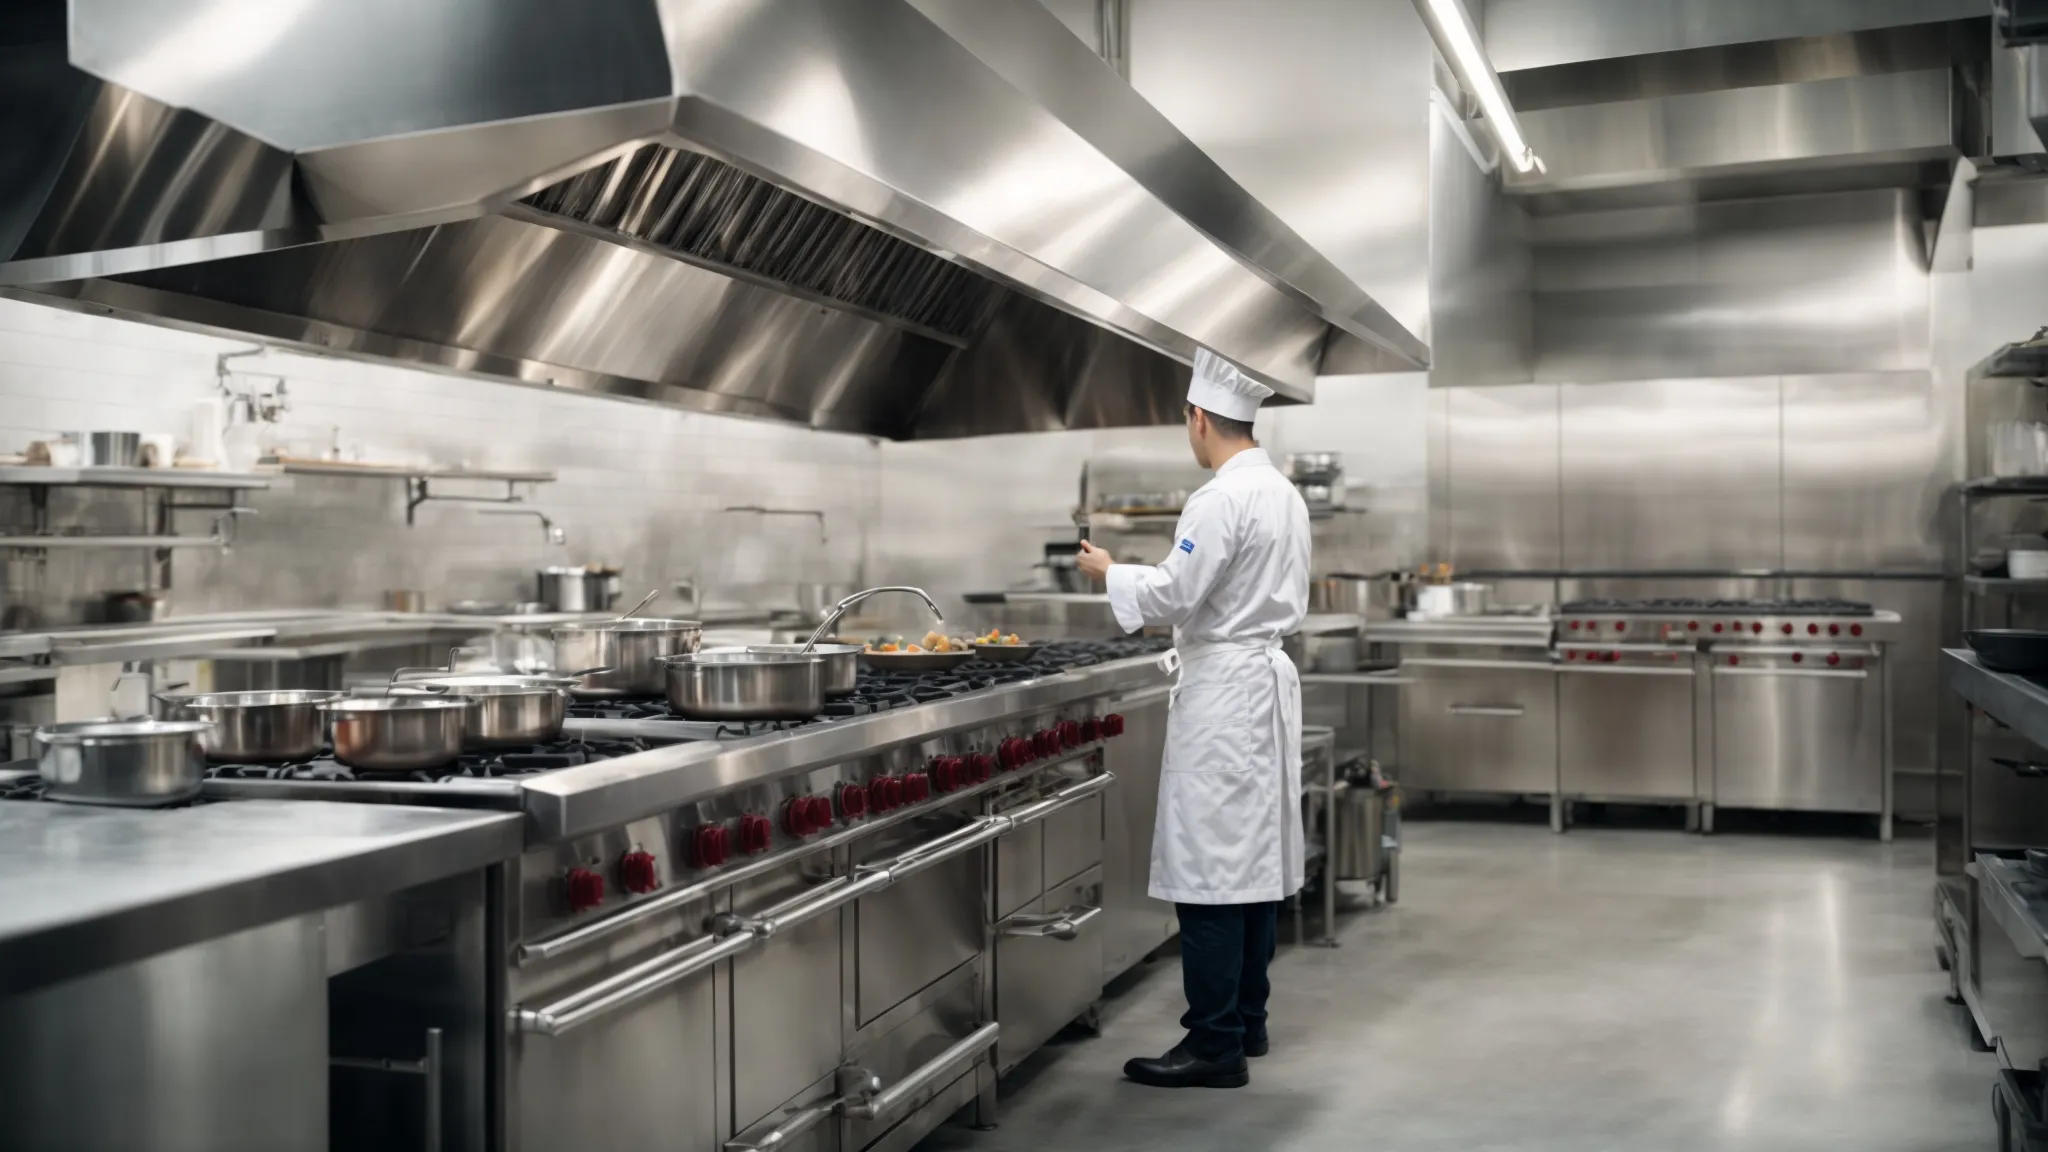 a chef inspects a shiny, clean kitchen hood above a stainless steel stove in a bright commercial kitchen.